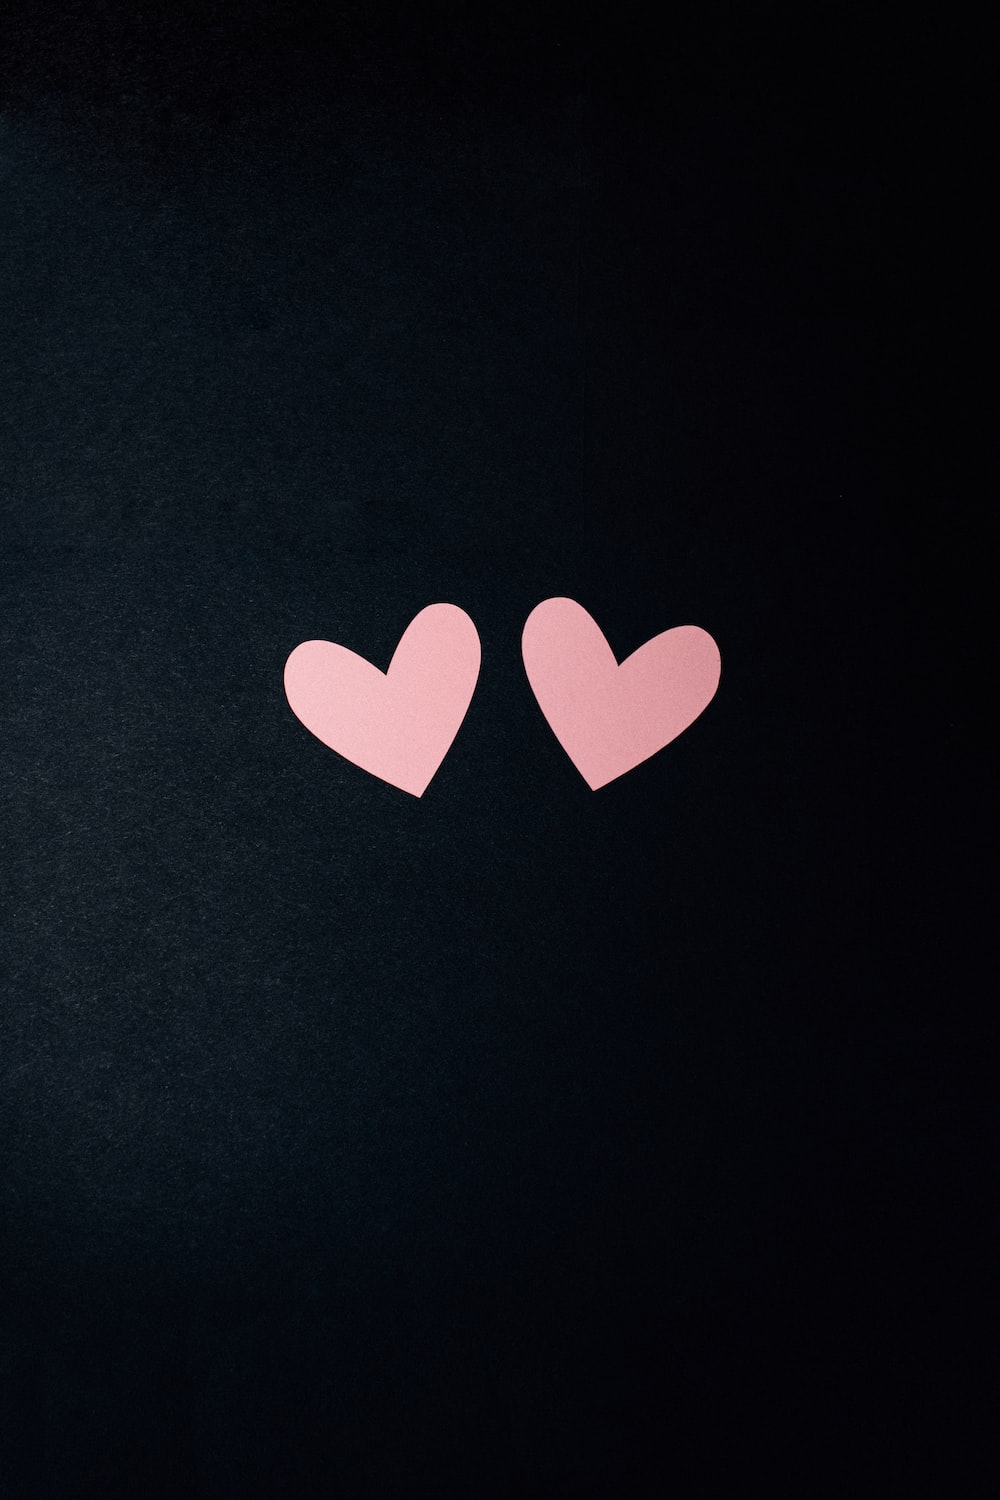 Pink Heart Picture. Download Free Image